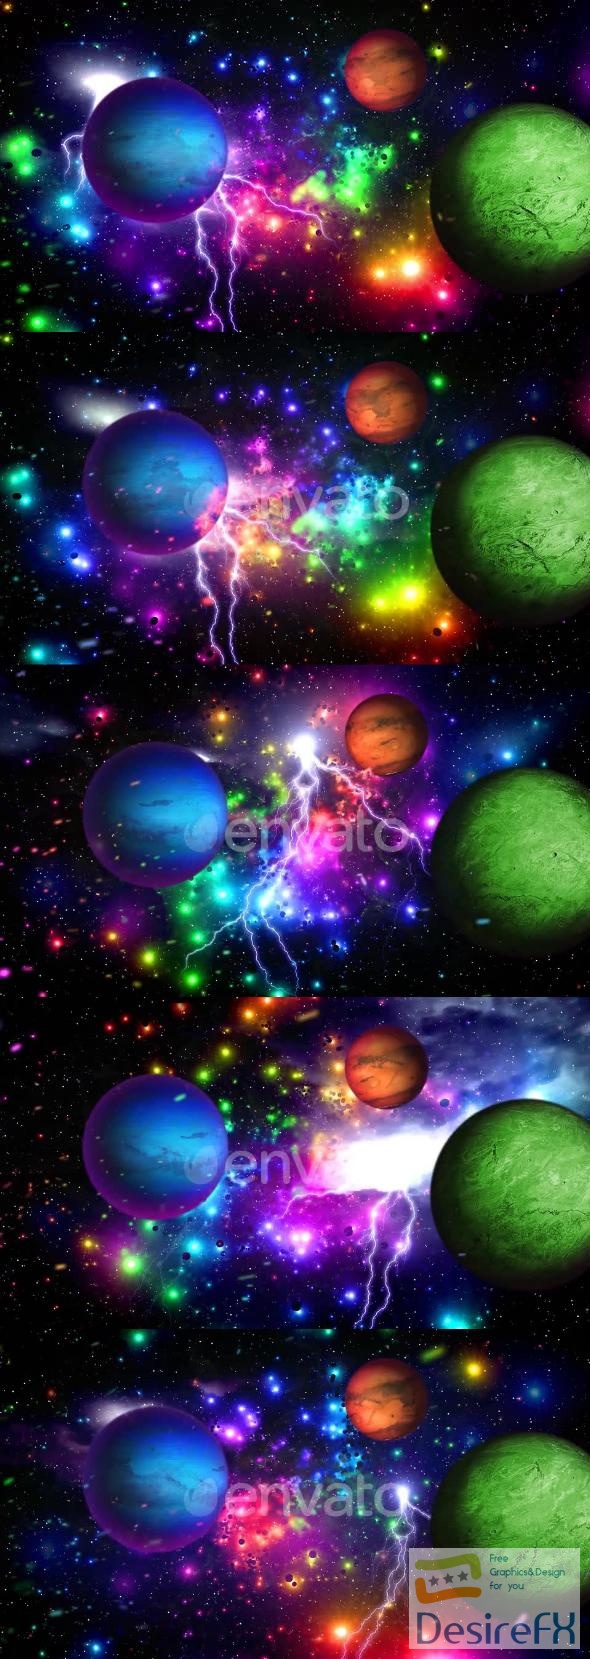 VideoHive Storm In Fantasy Space 47553902